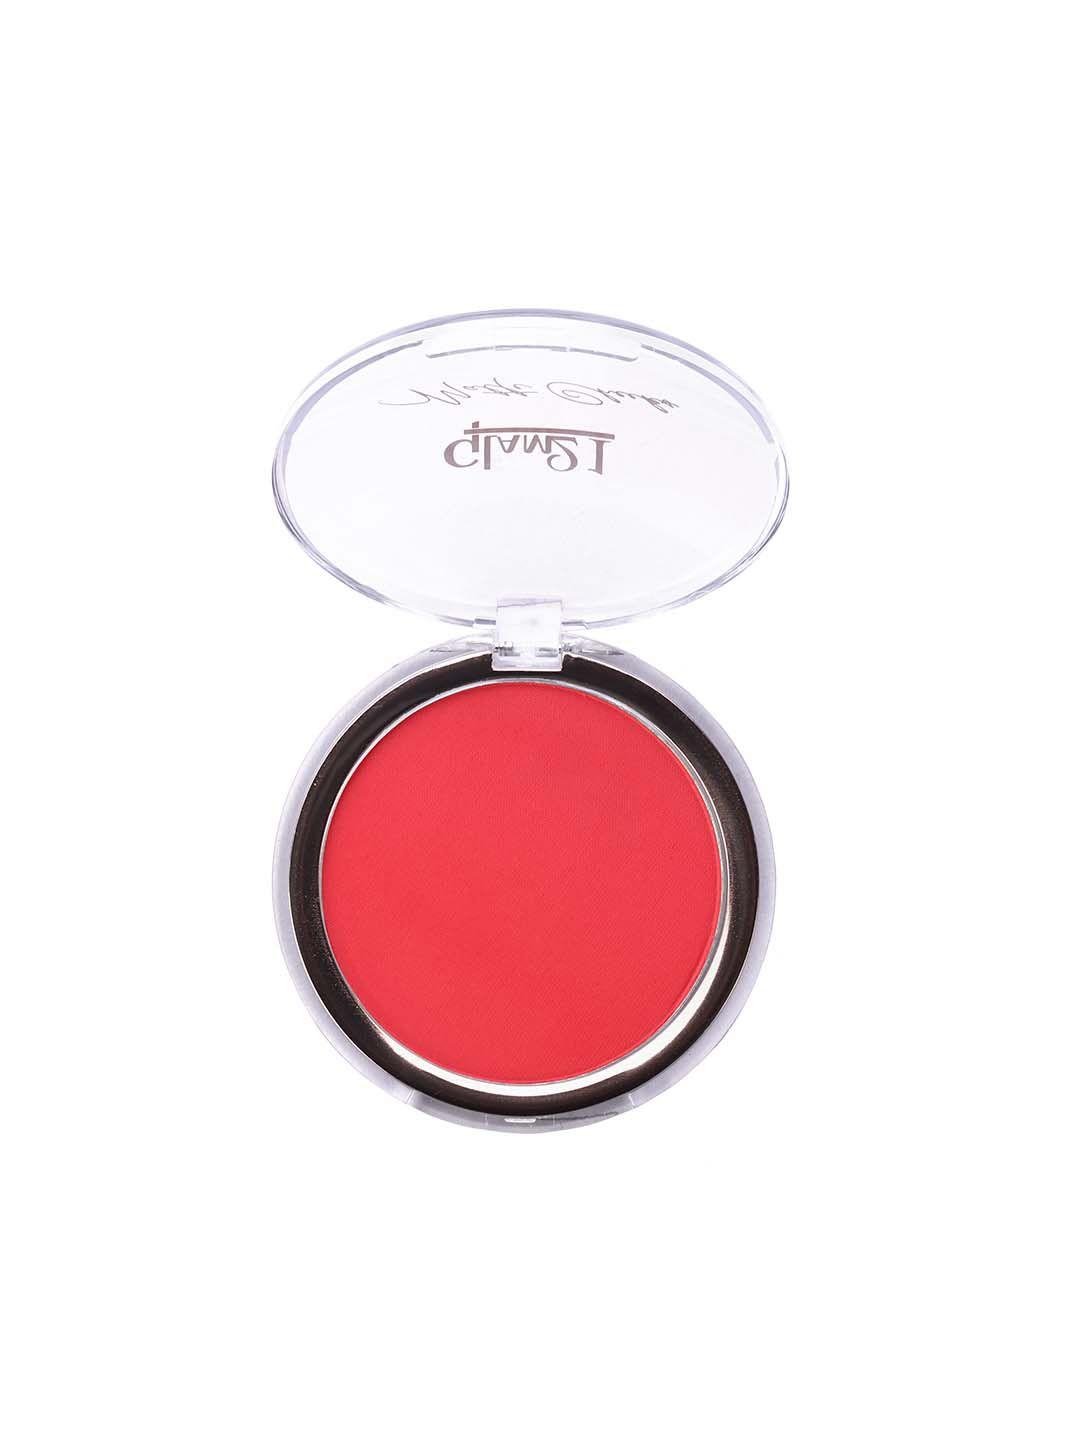 glam21 matte cheeks perfect pop of color blush 5g - shade 07